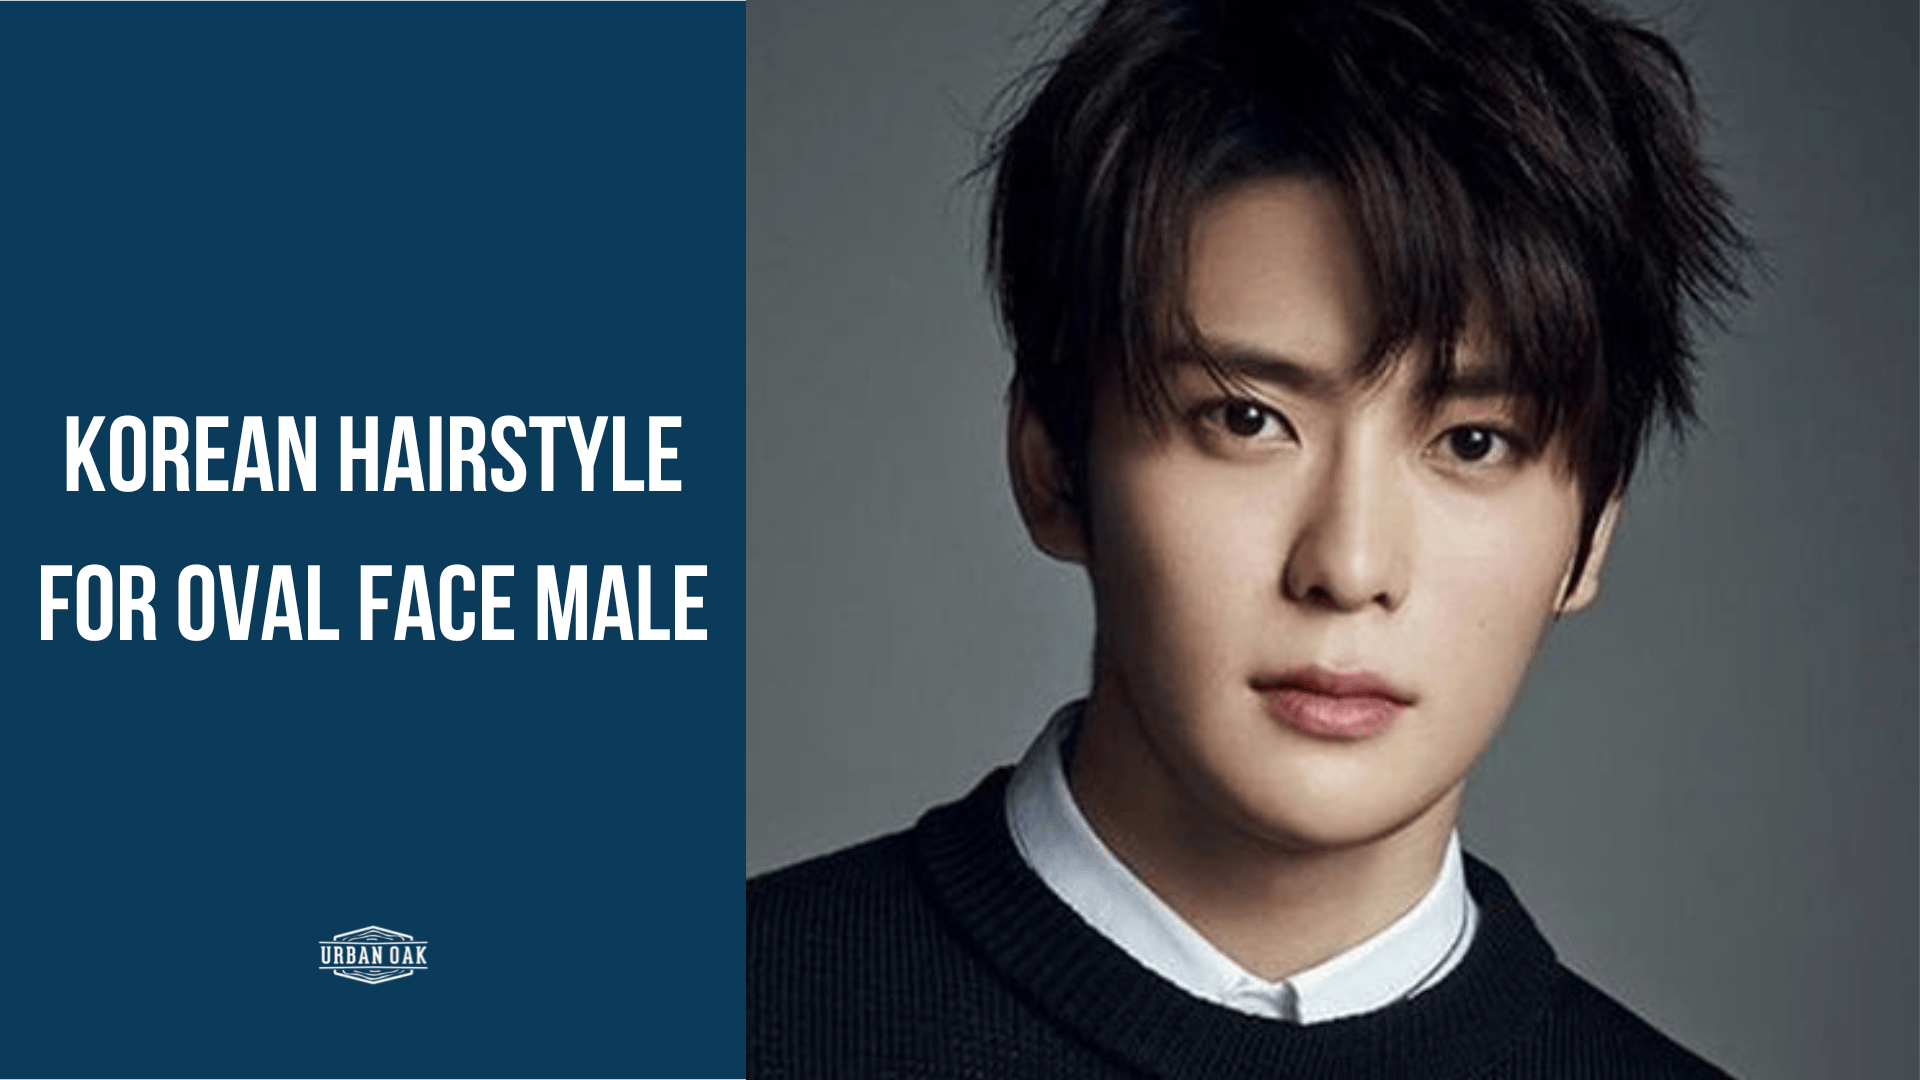 Korean hairstyle for oval face male